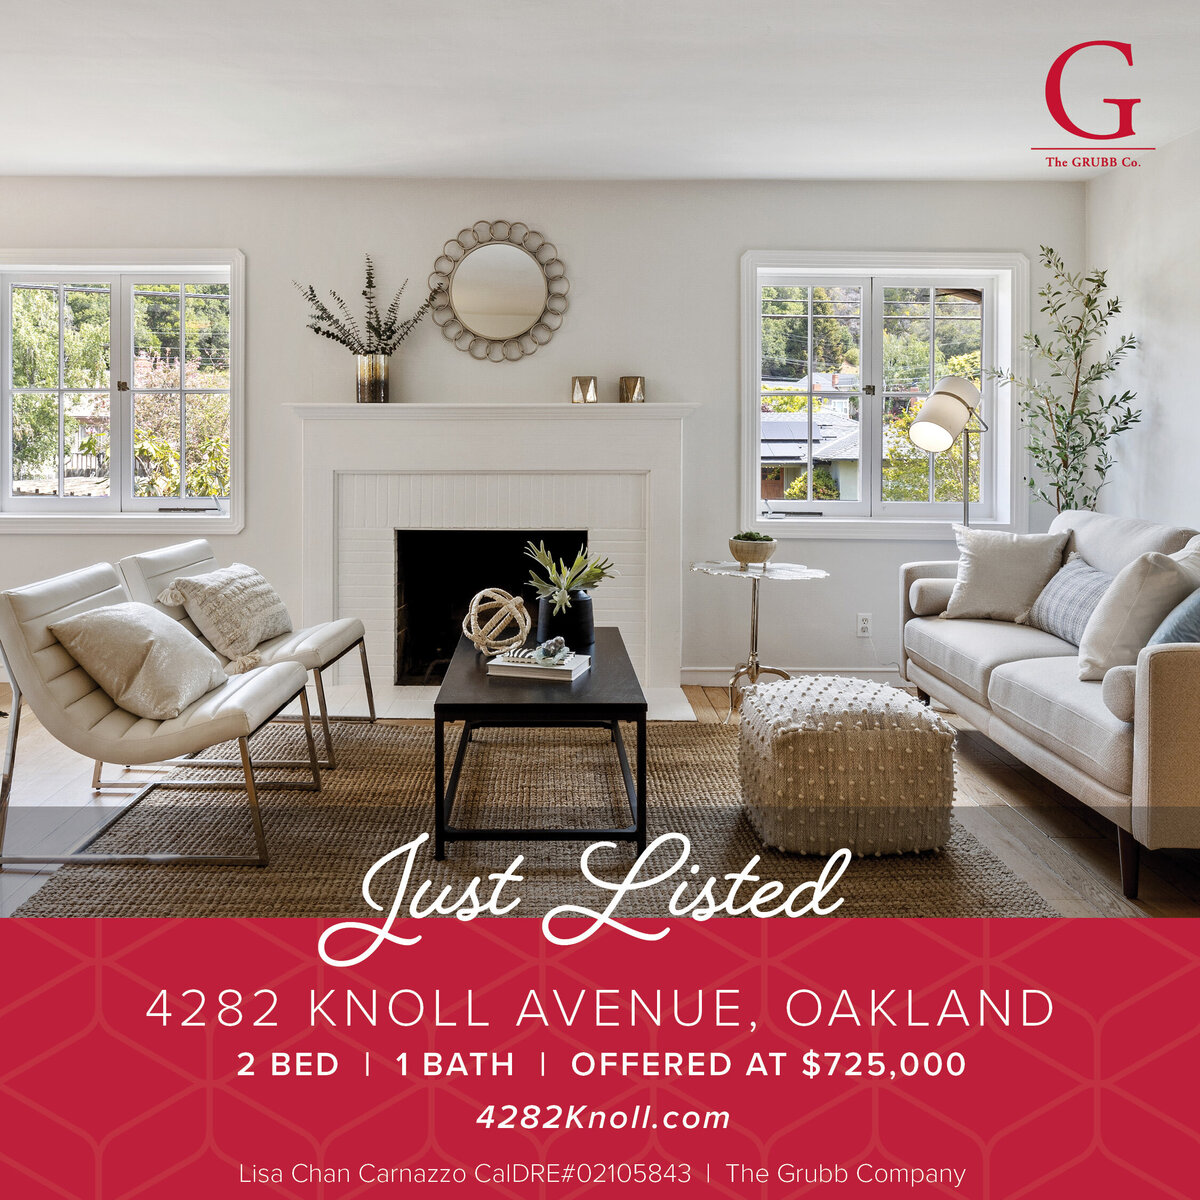 Just Listed - 4282 Knoll Avenue, Oakland LC